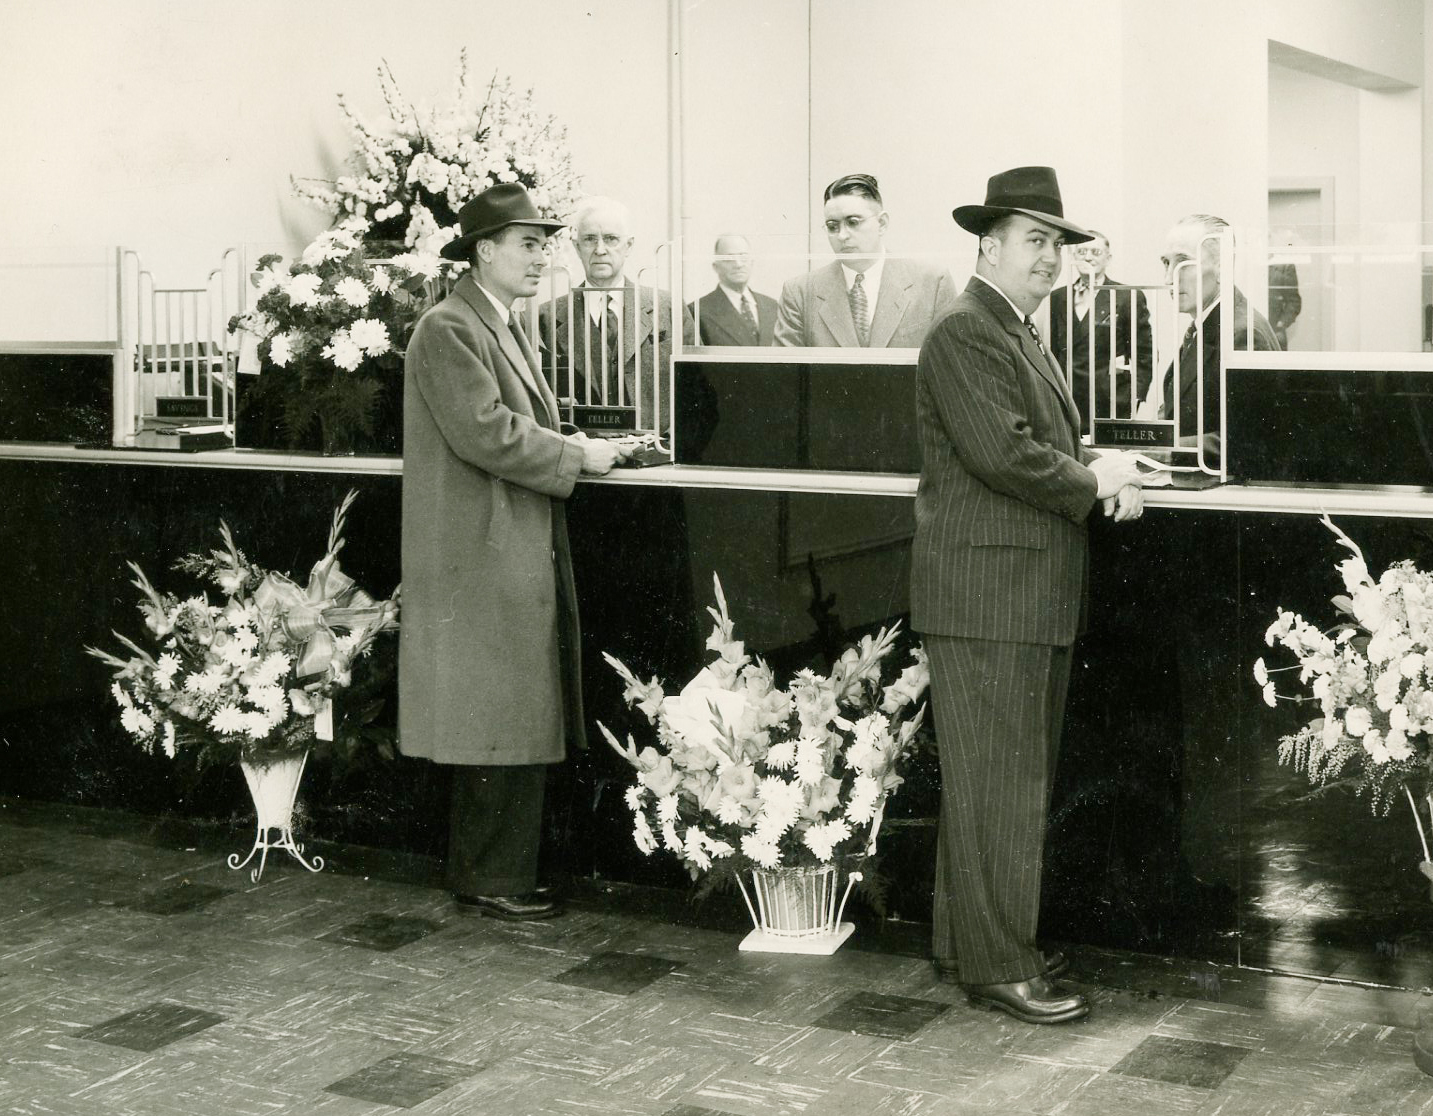 Paducah Opening Day: Two men at a counter with flowers